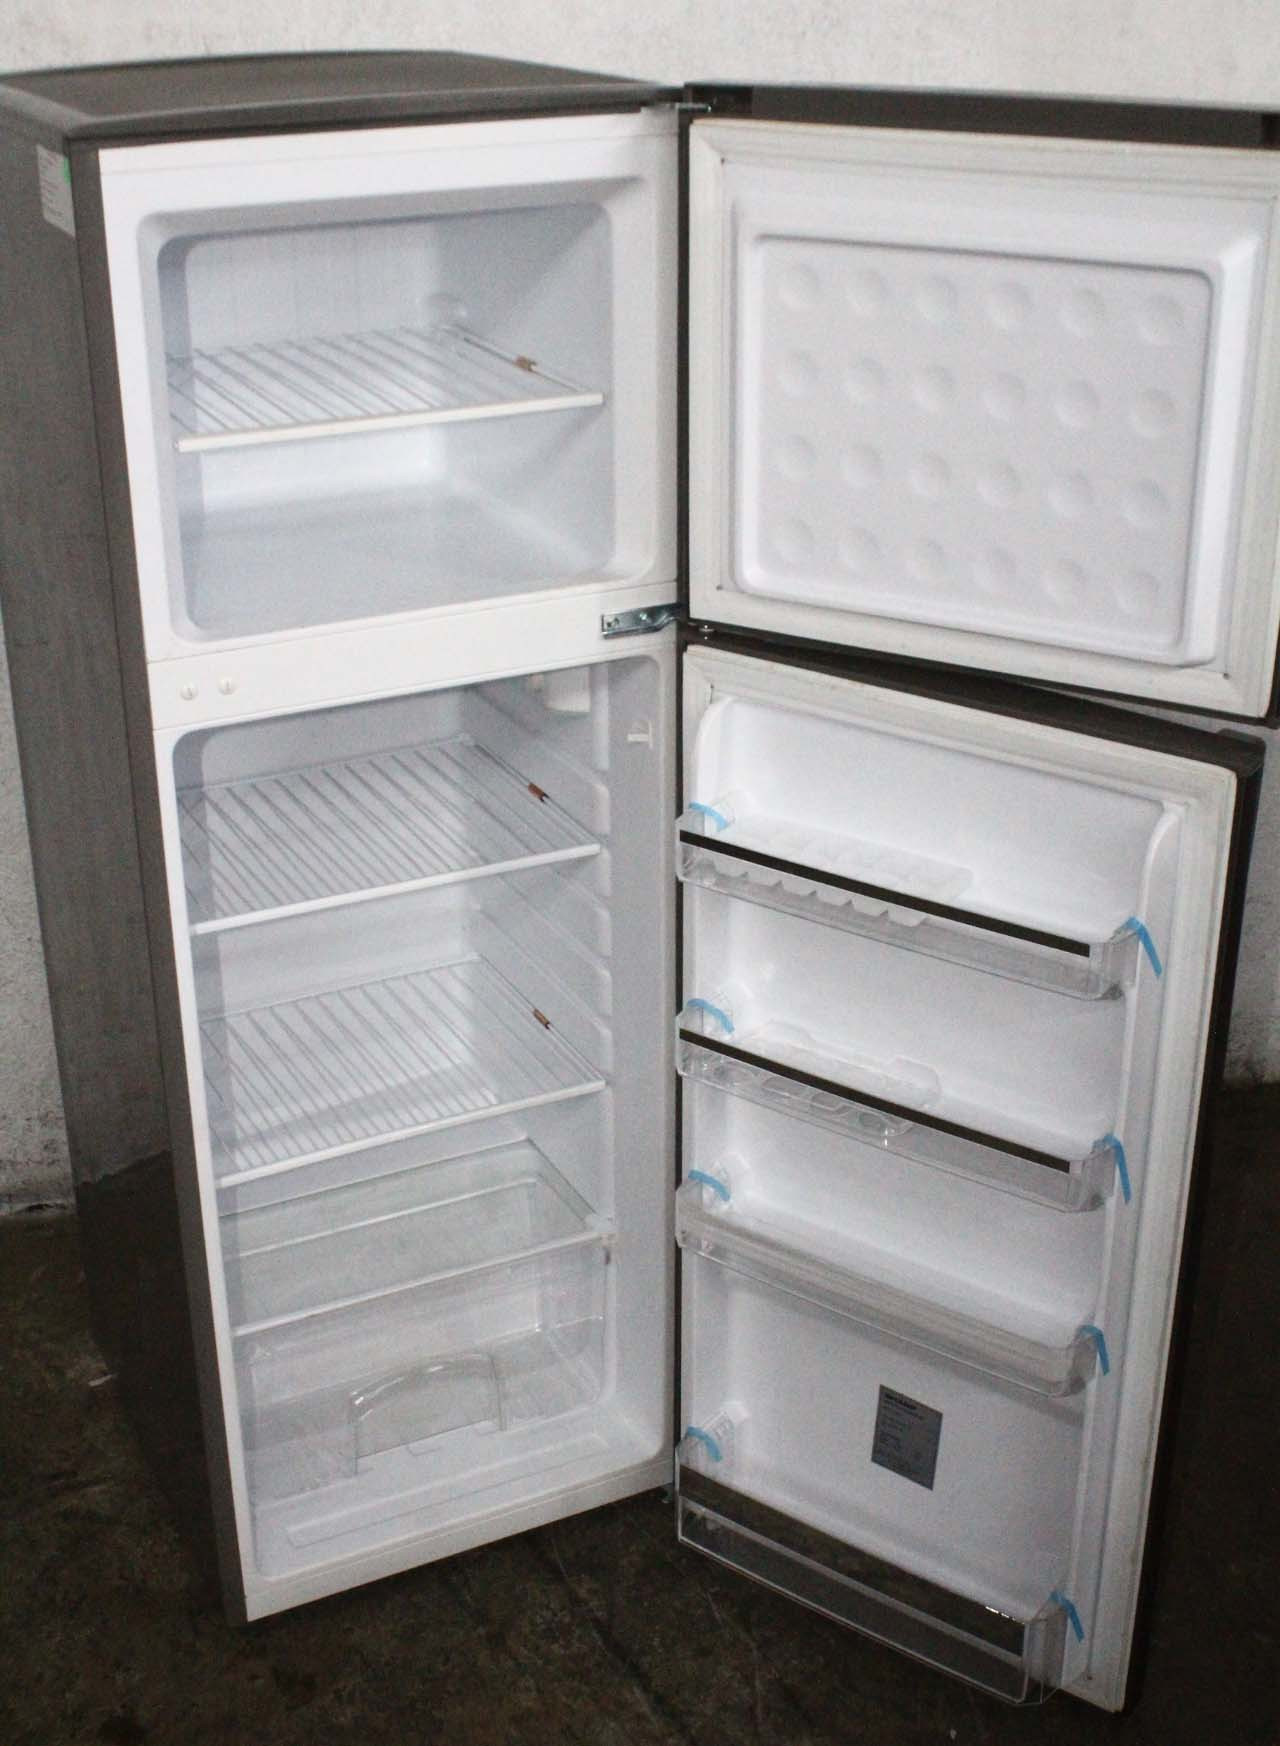 RCA 7.5CU FT REFRIGERATOR - WHITE - Earl's Auction Company